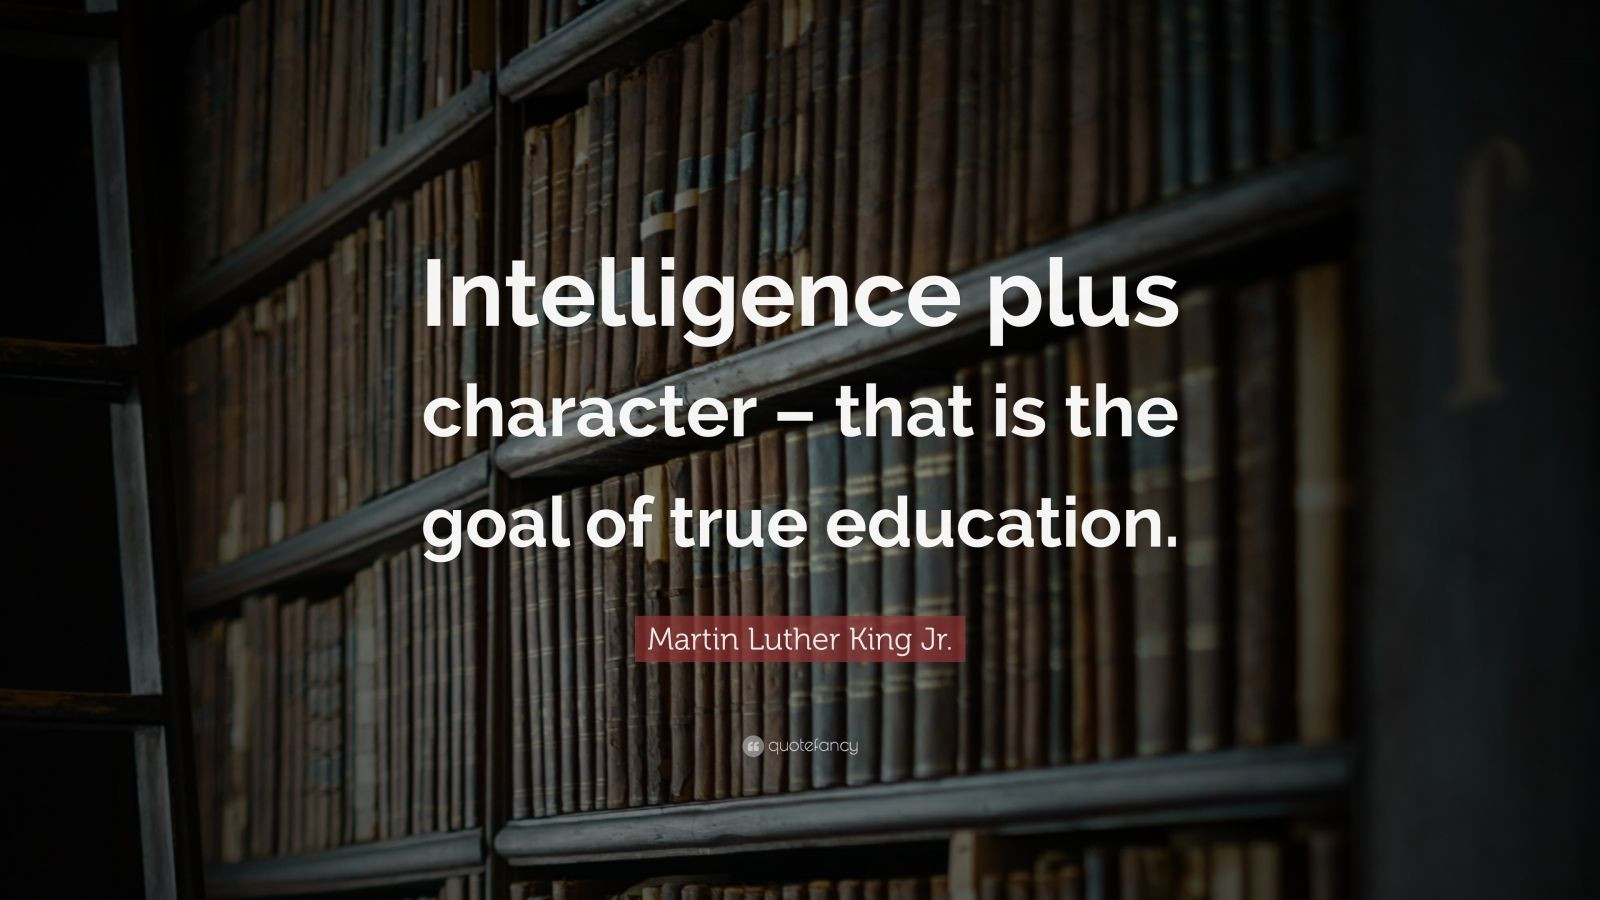 Martin Luther King Jr Quotes On Education
 Martin Luther King Jr Quote “Intelligence plus character